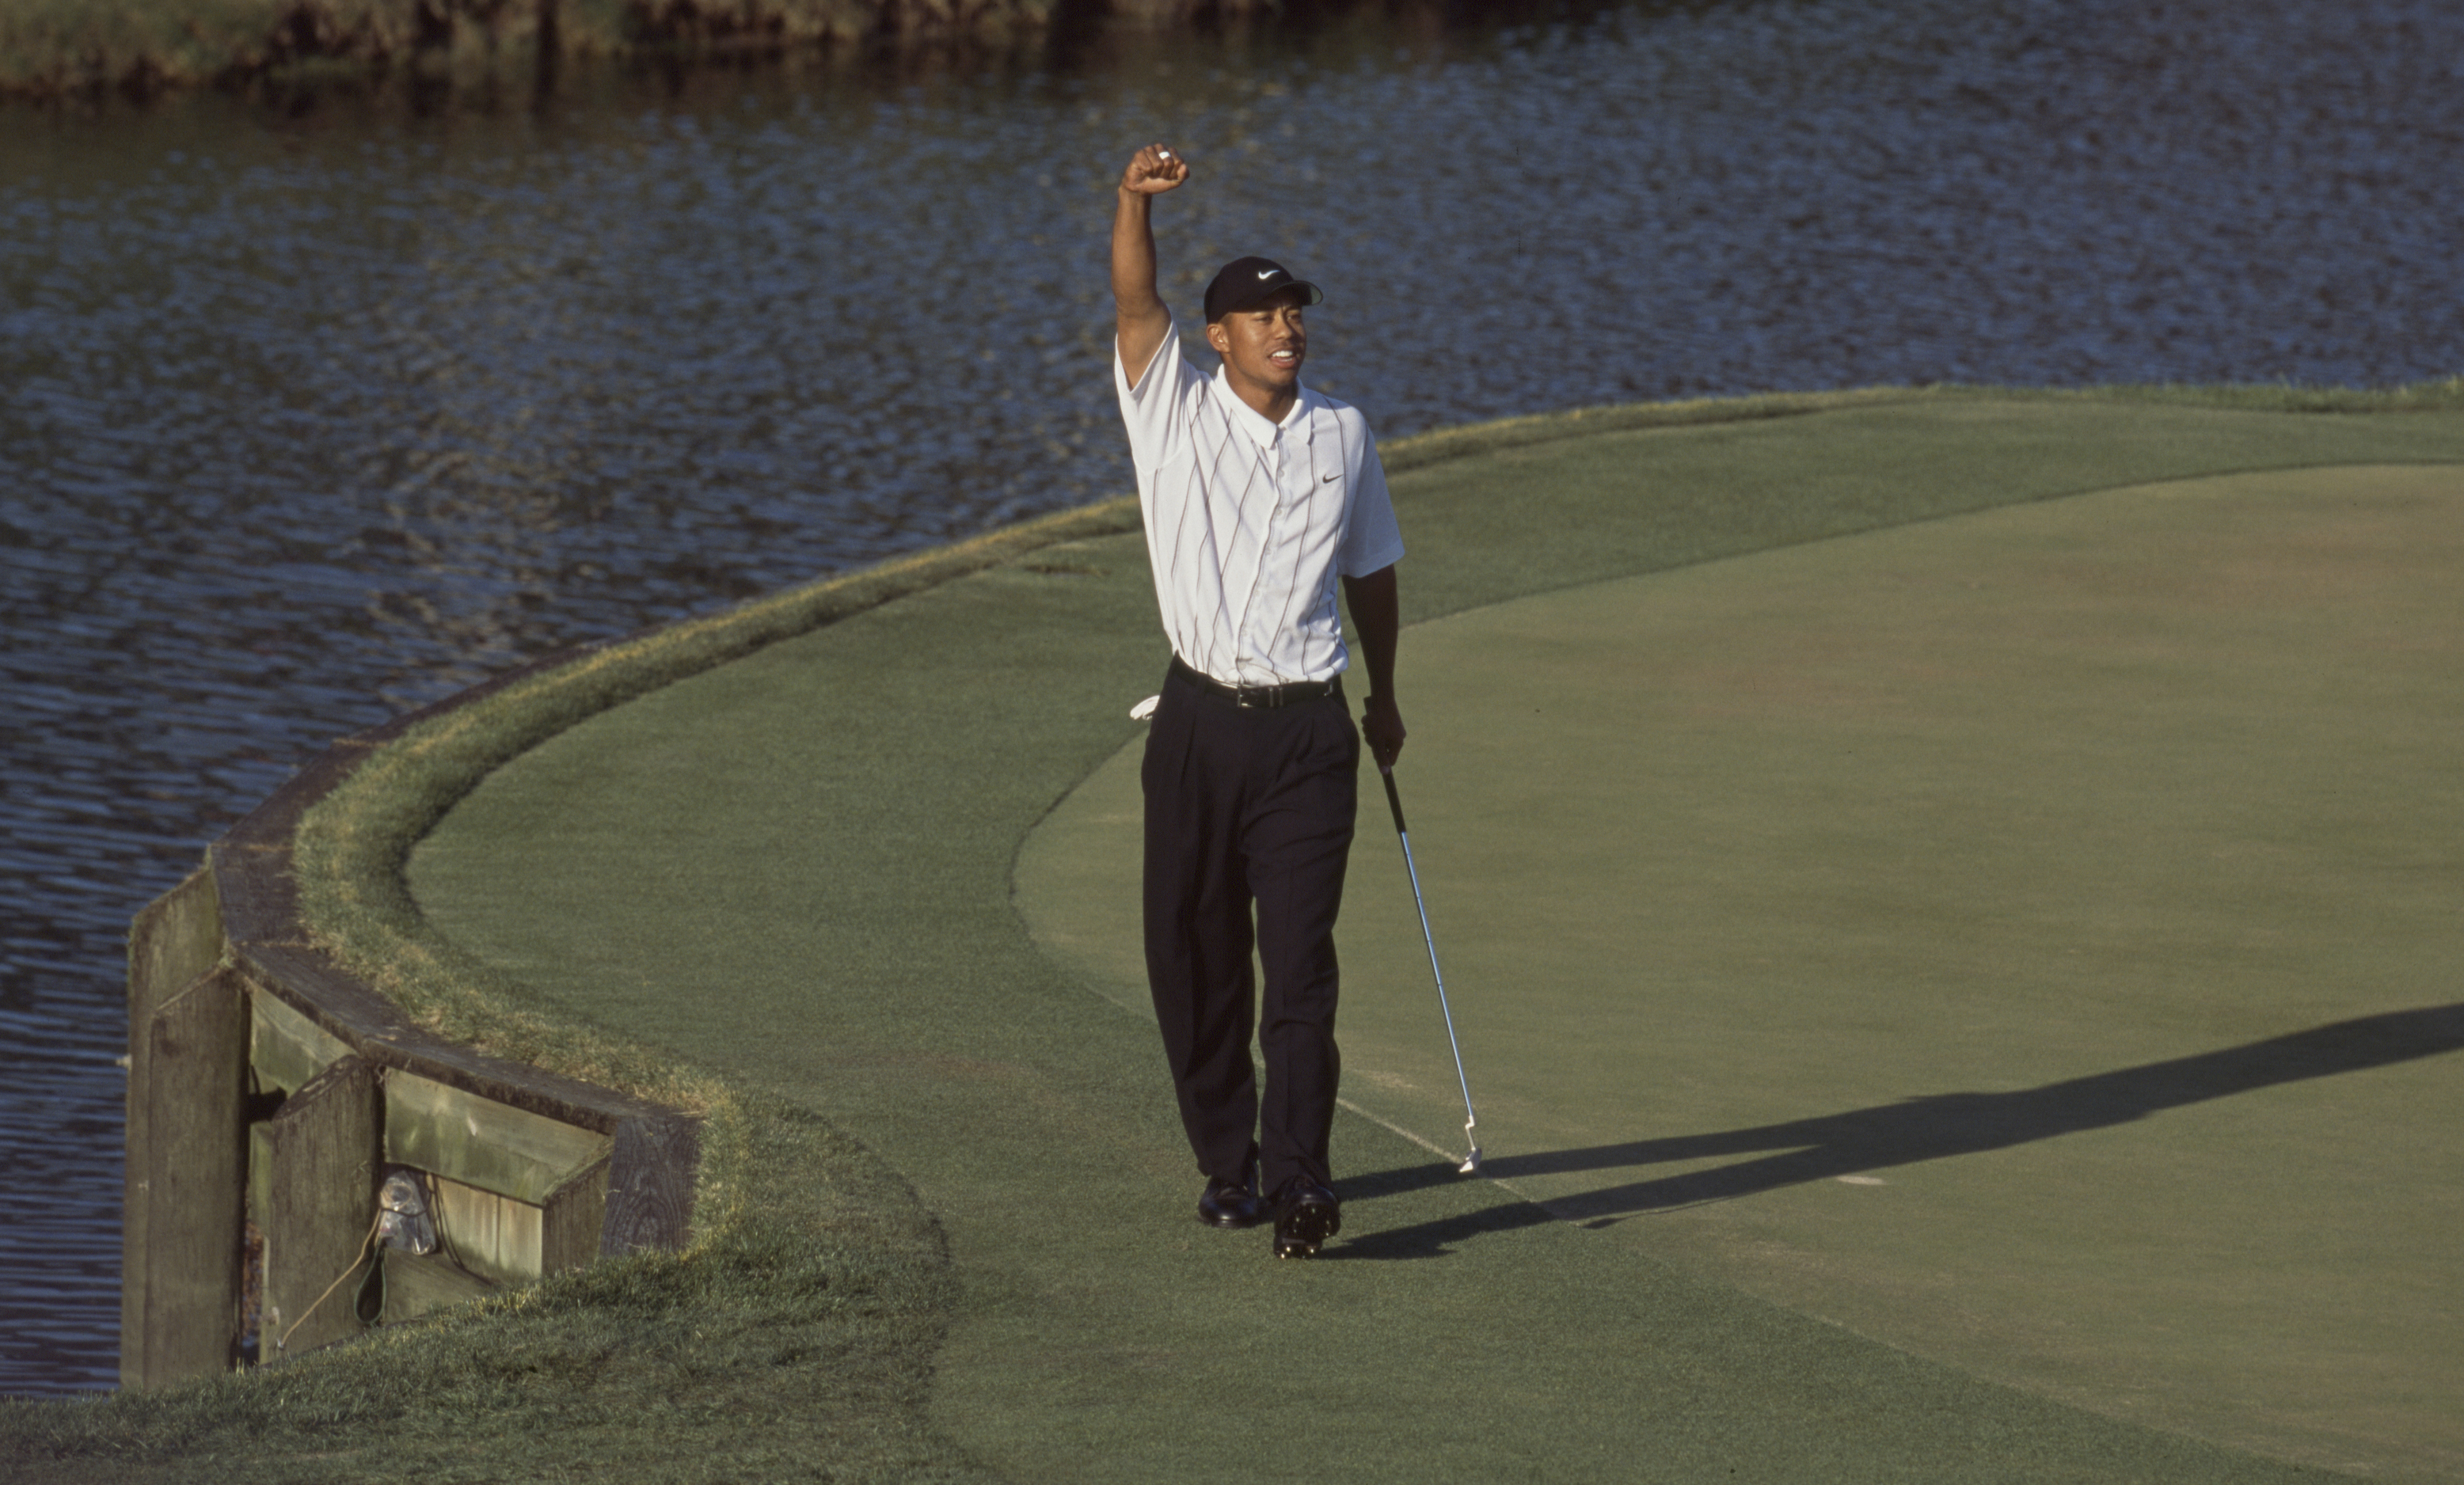 The 40 best moments from the first 40 years at TPC Sawgrass